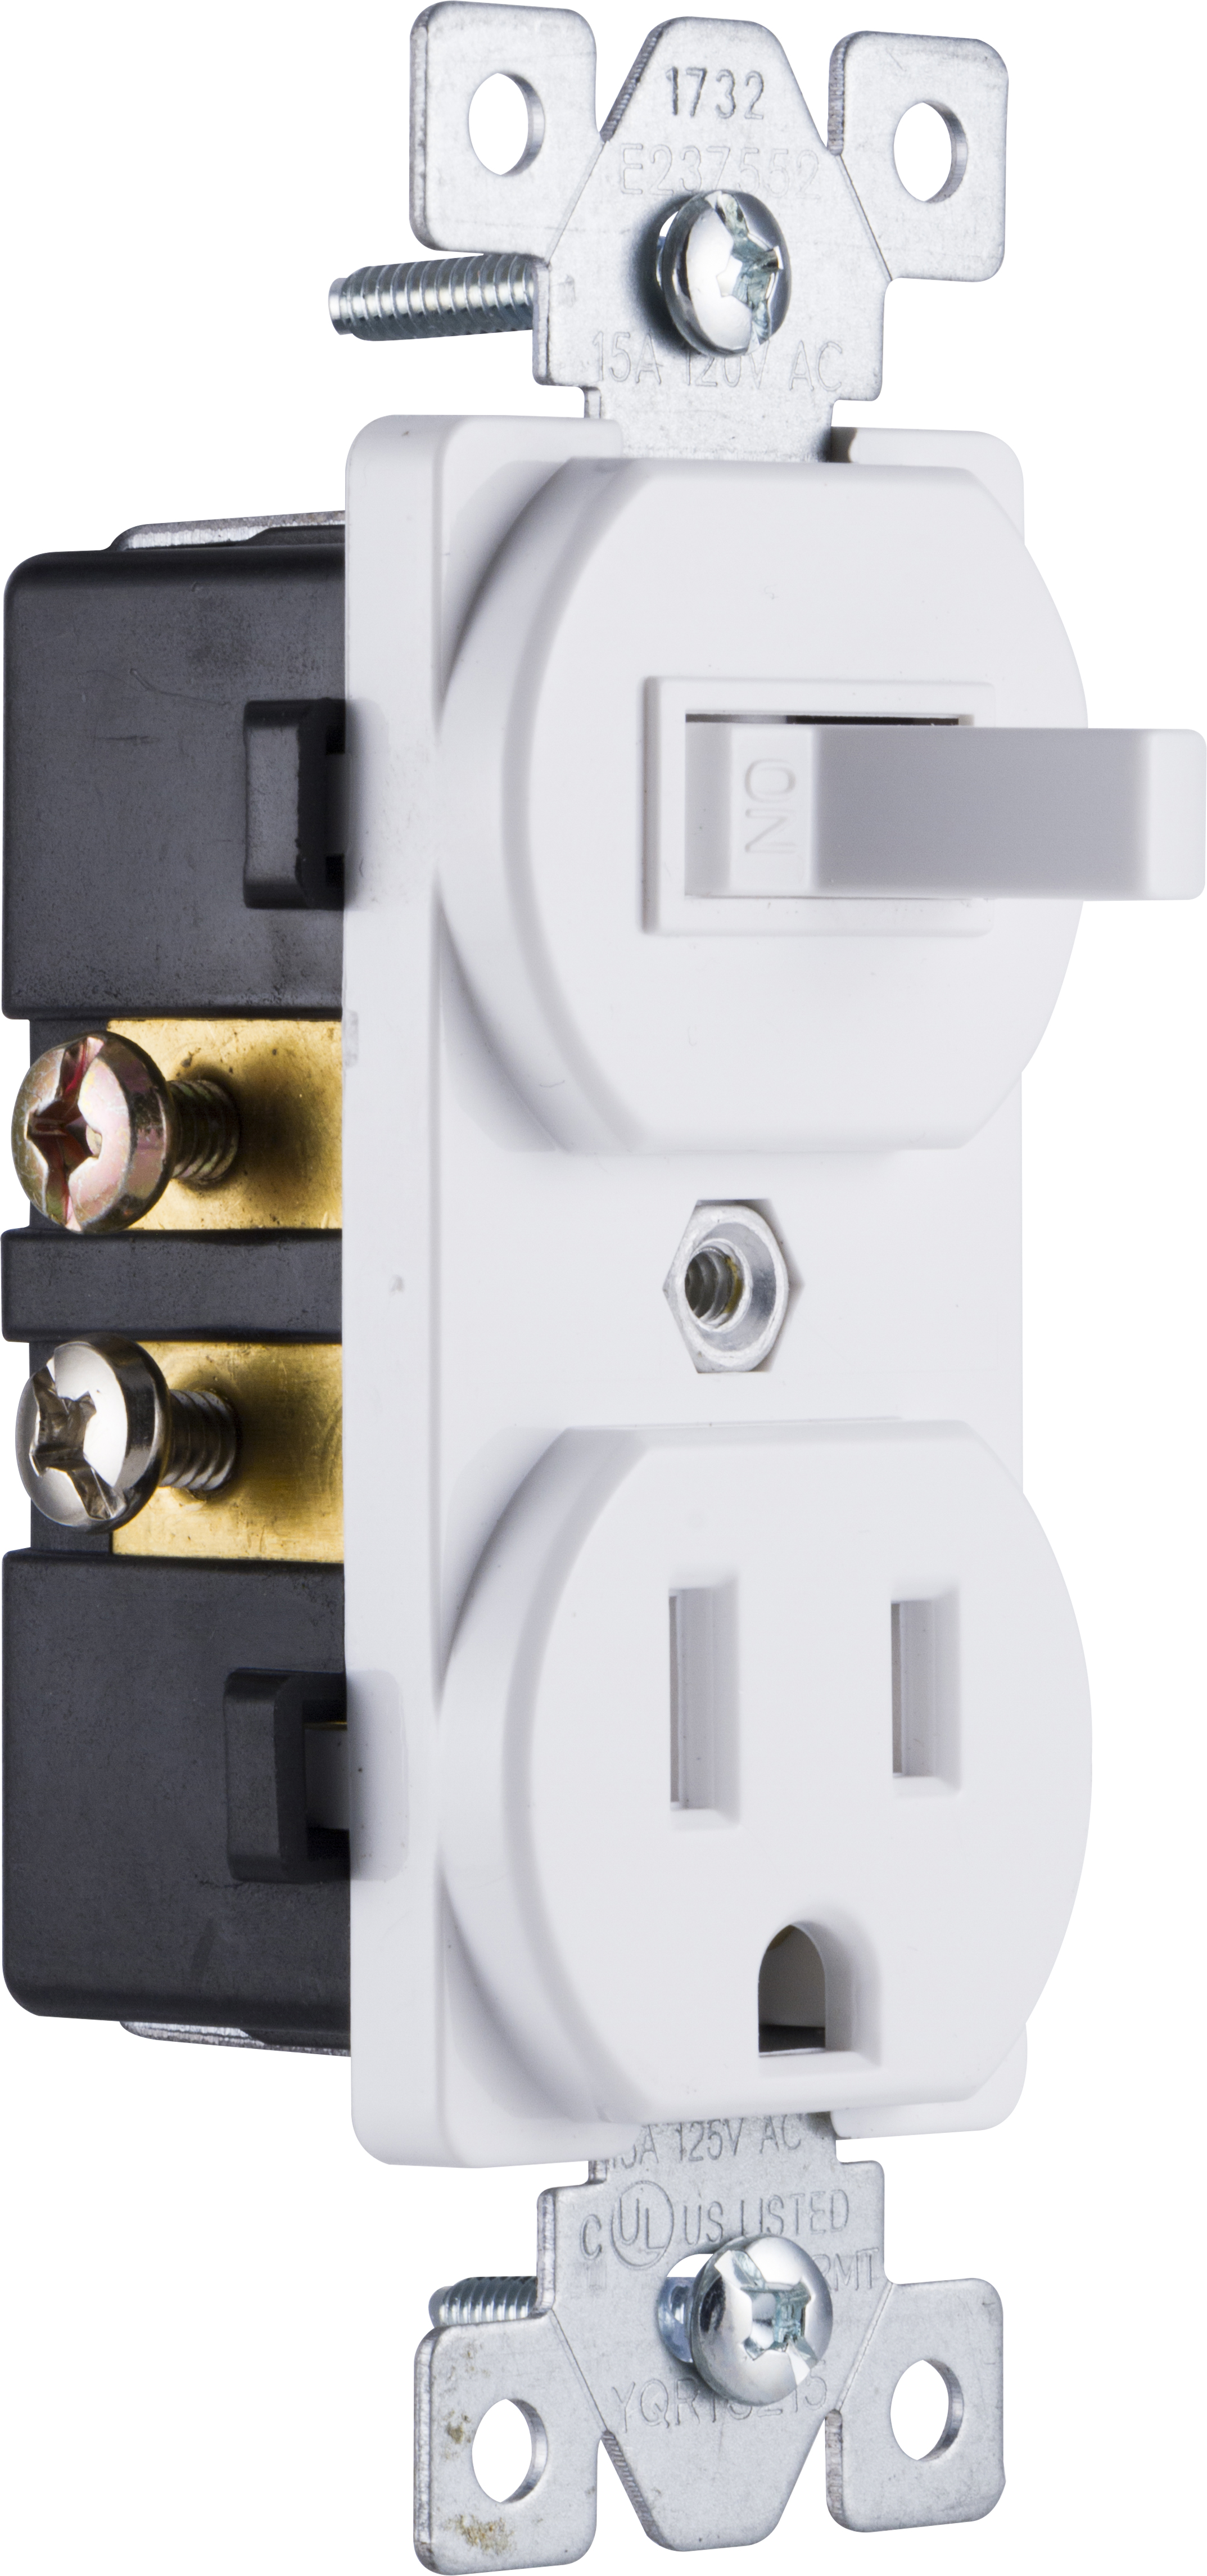 GE Wall Switch Outlet - 59797 - image 4 of 6